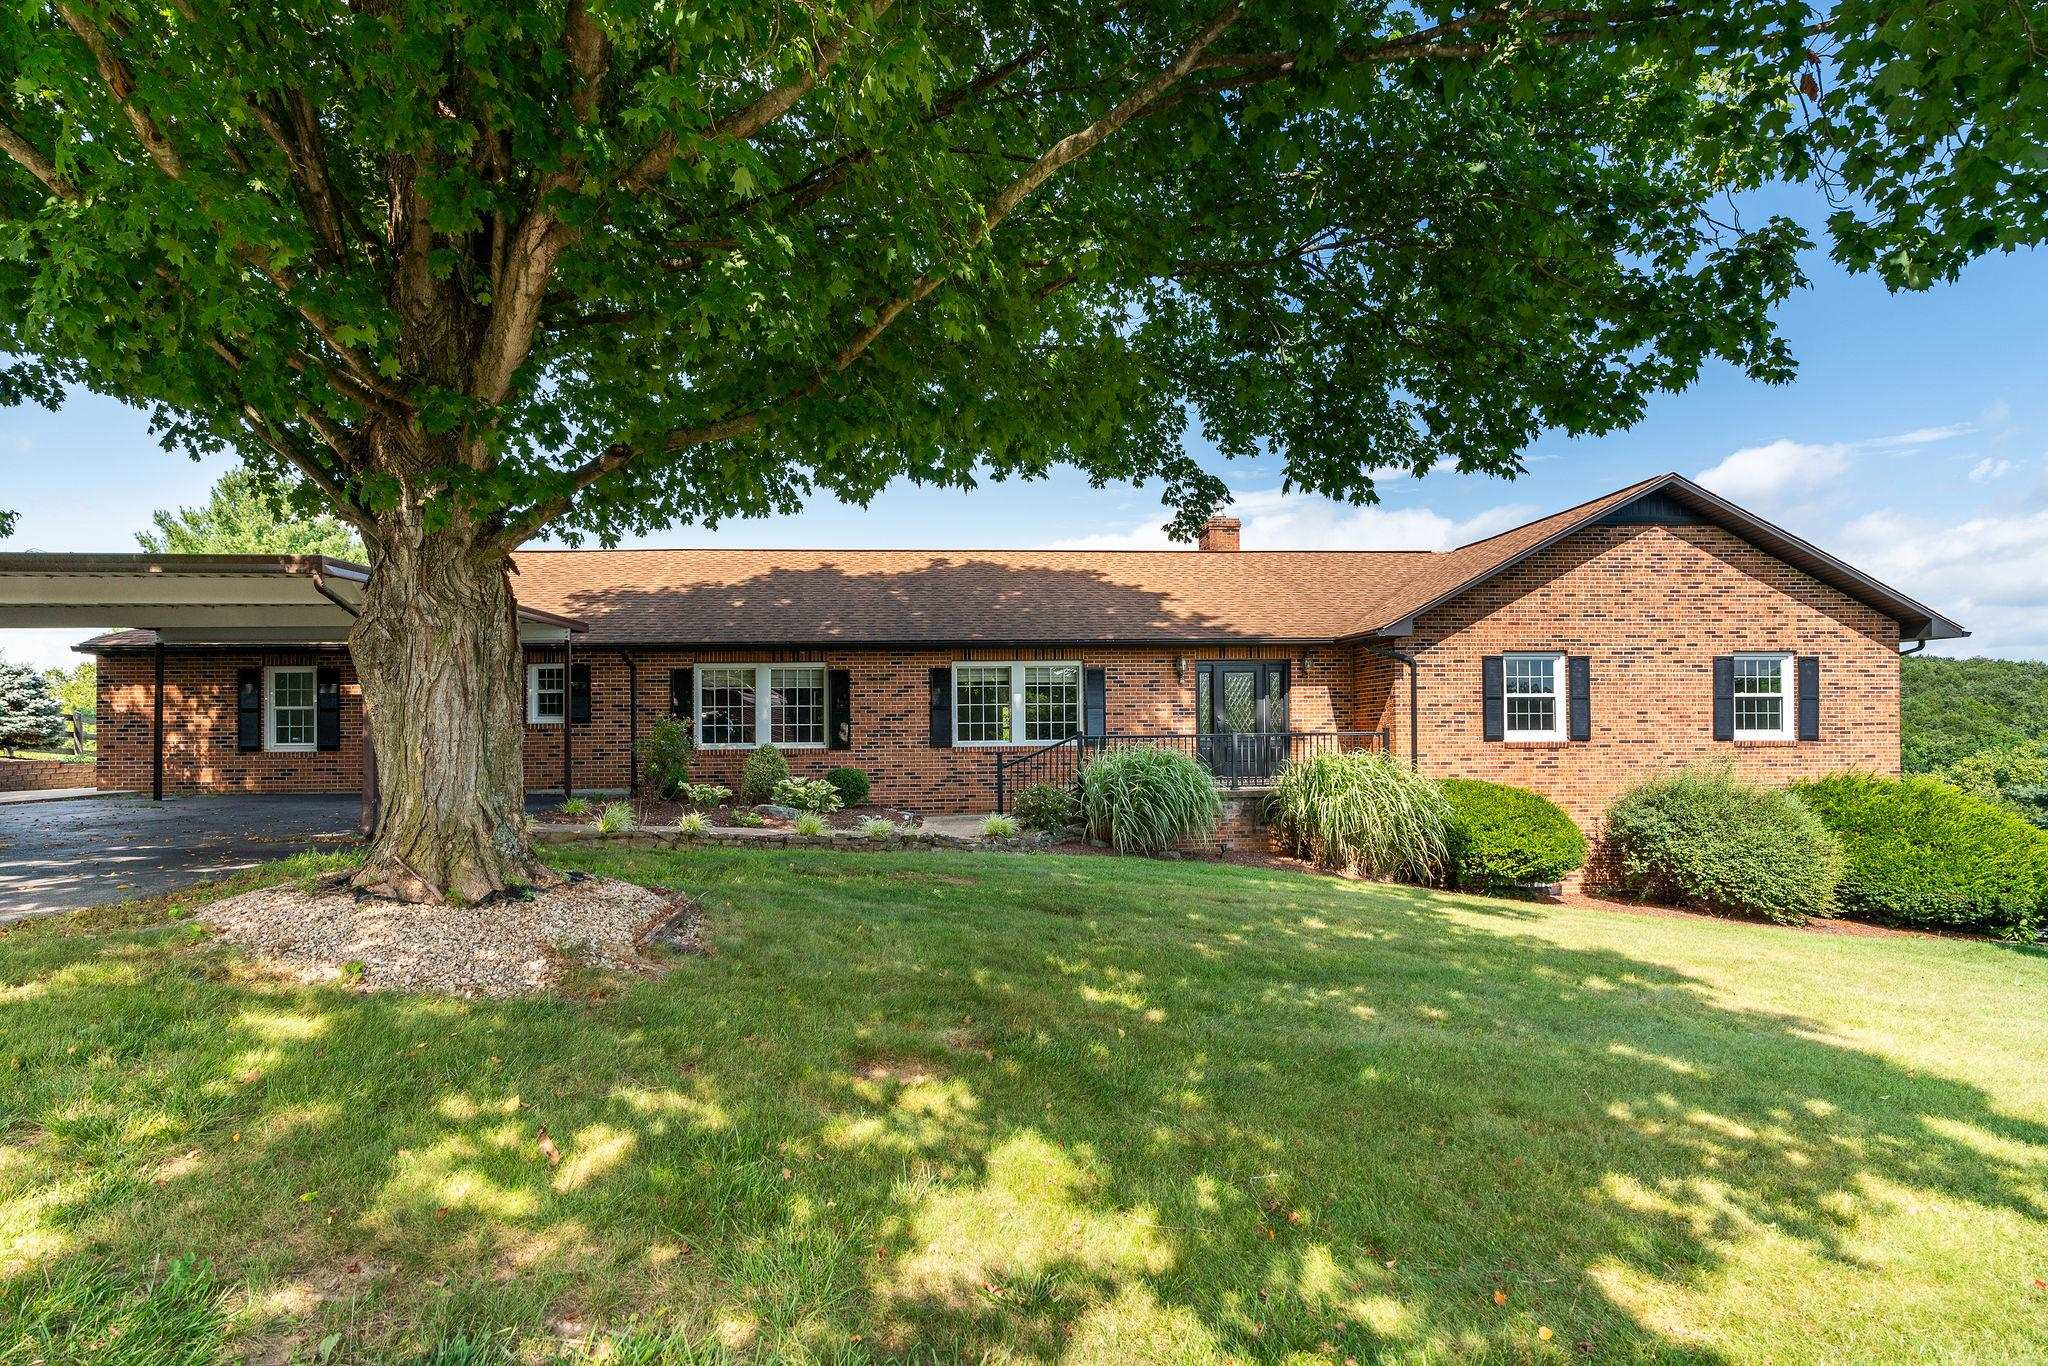 308 STONEWALL RD, WEYERS CAVE, Virginia 24486, 5 Bedrooms Bedrooms, ,5 BathroomsBathrooms,Residential,308 Stonewall Rd. 5000+ sq ft home on 7.8 acres. P,308 STONEWALL RD,644238 MLS # 644238